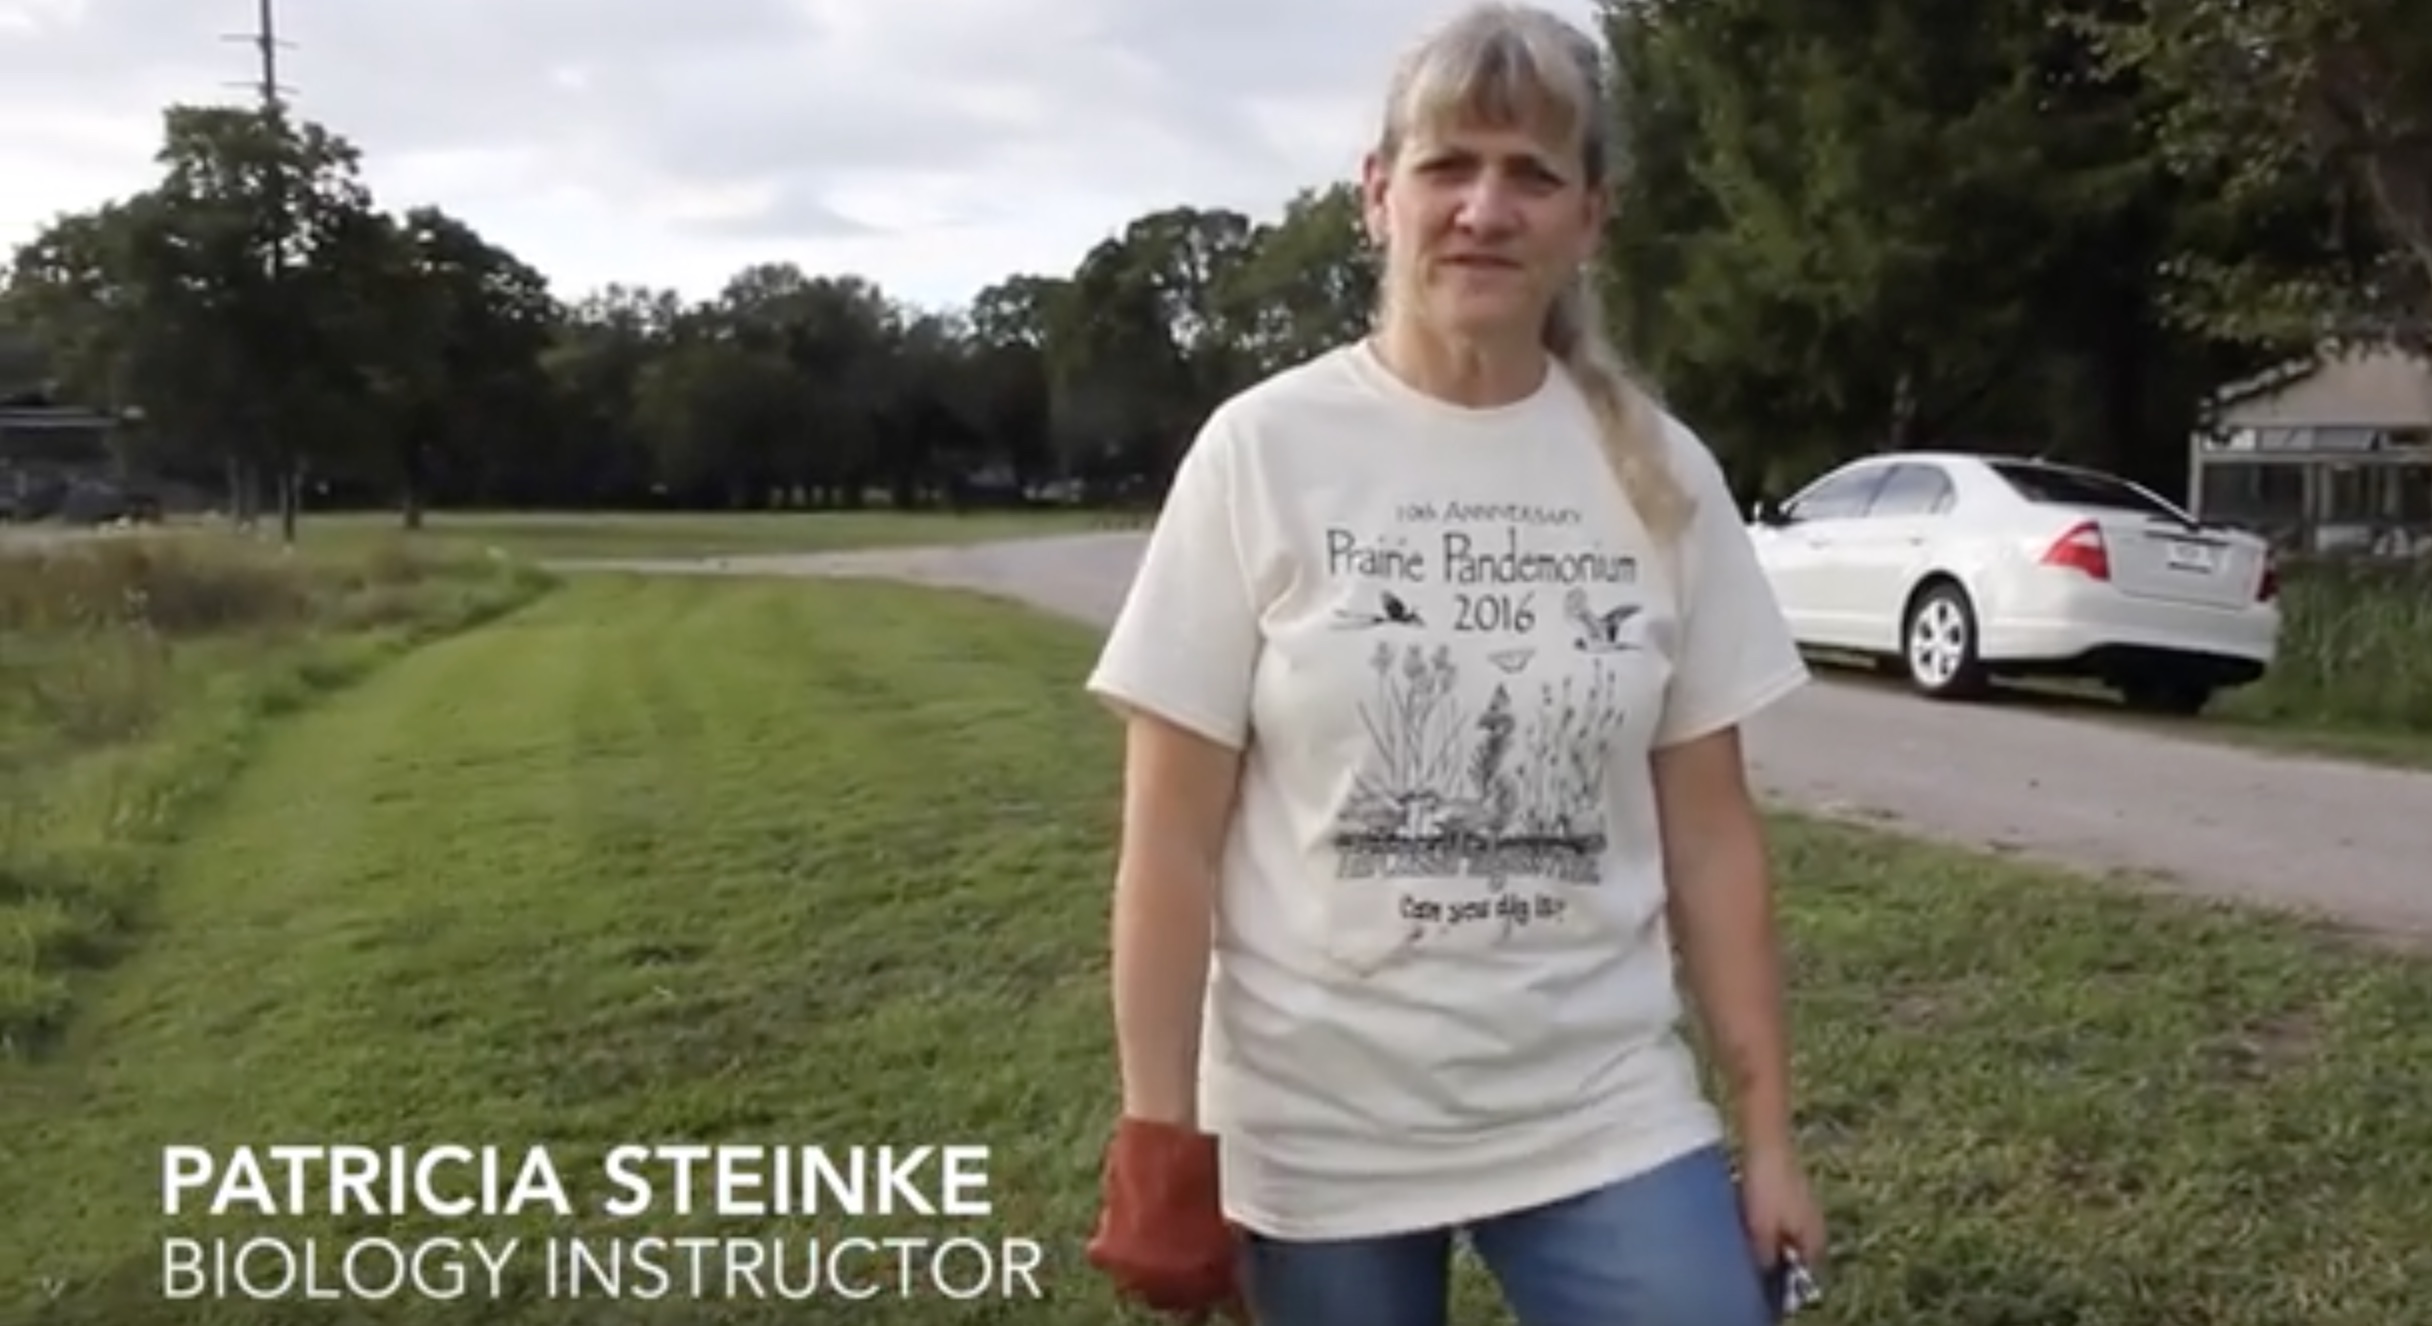 Screenshot: Patty Steinke, biology instructor, talking about Prairie Pandemonium at Armand Bayou. Screenshot by The Signal reporter, Jeremy Gingrich